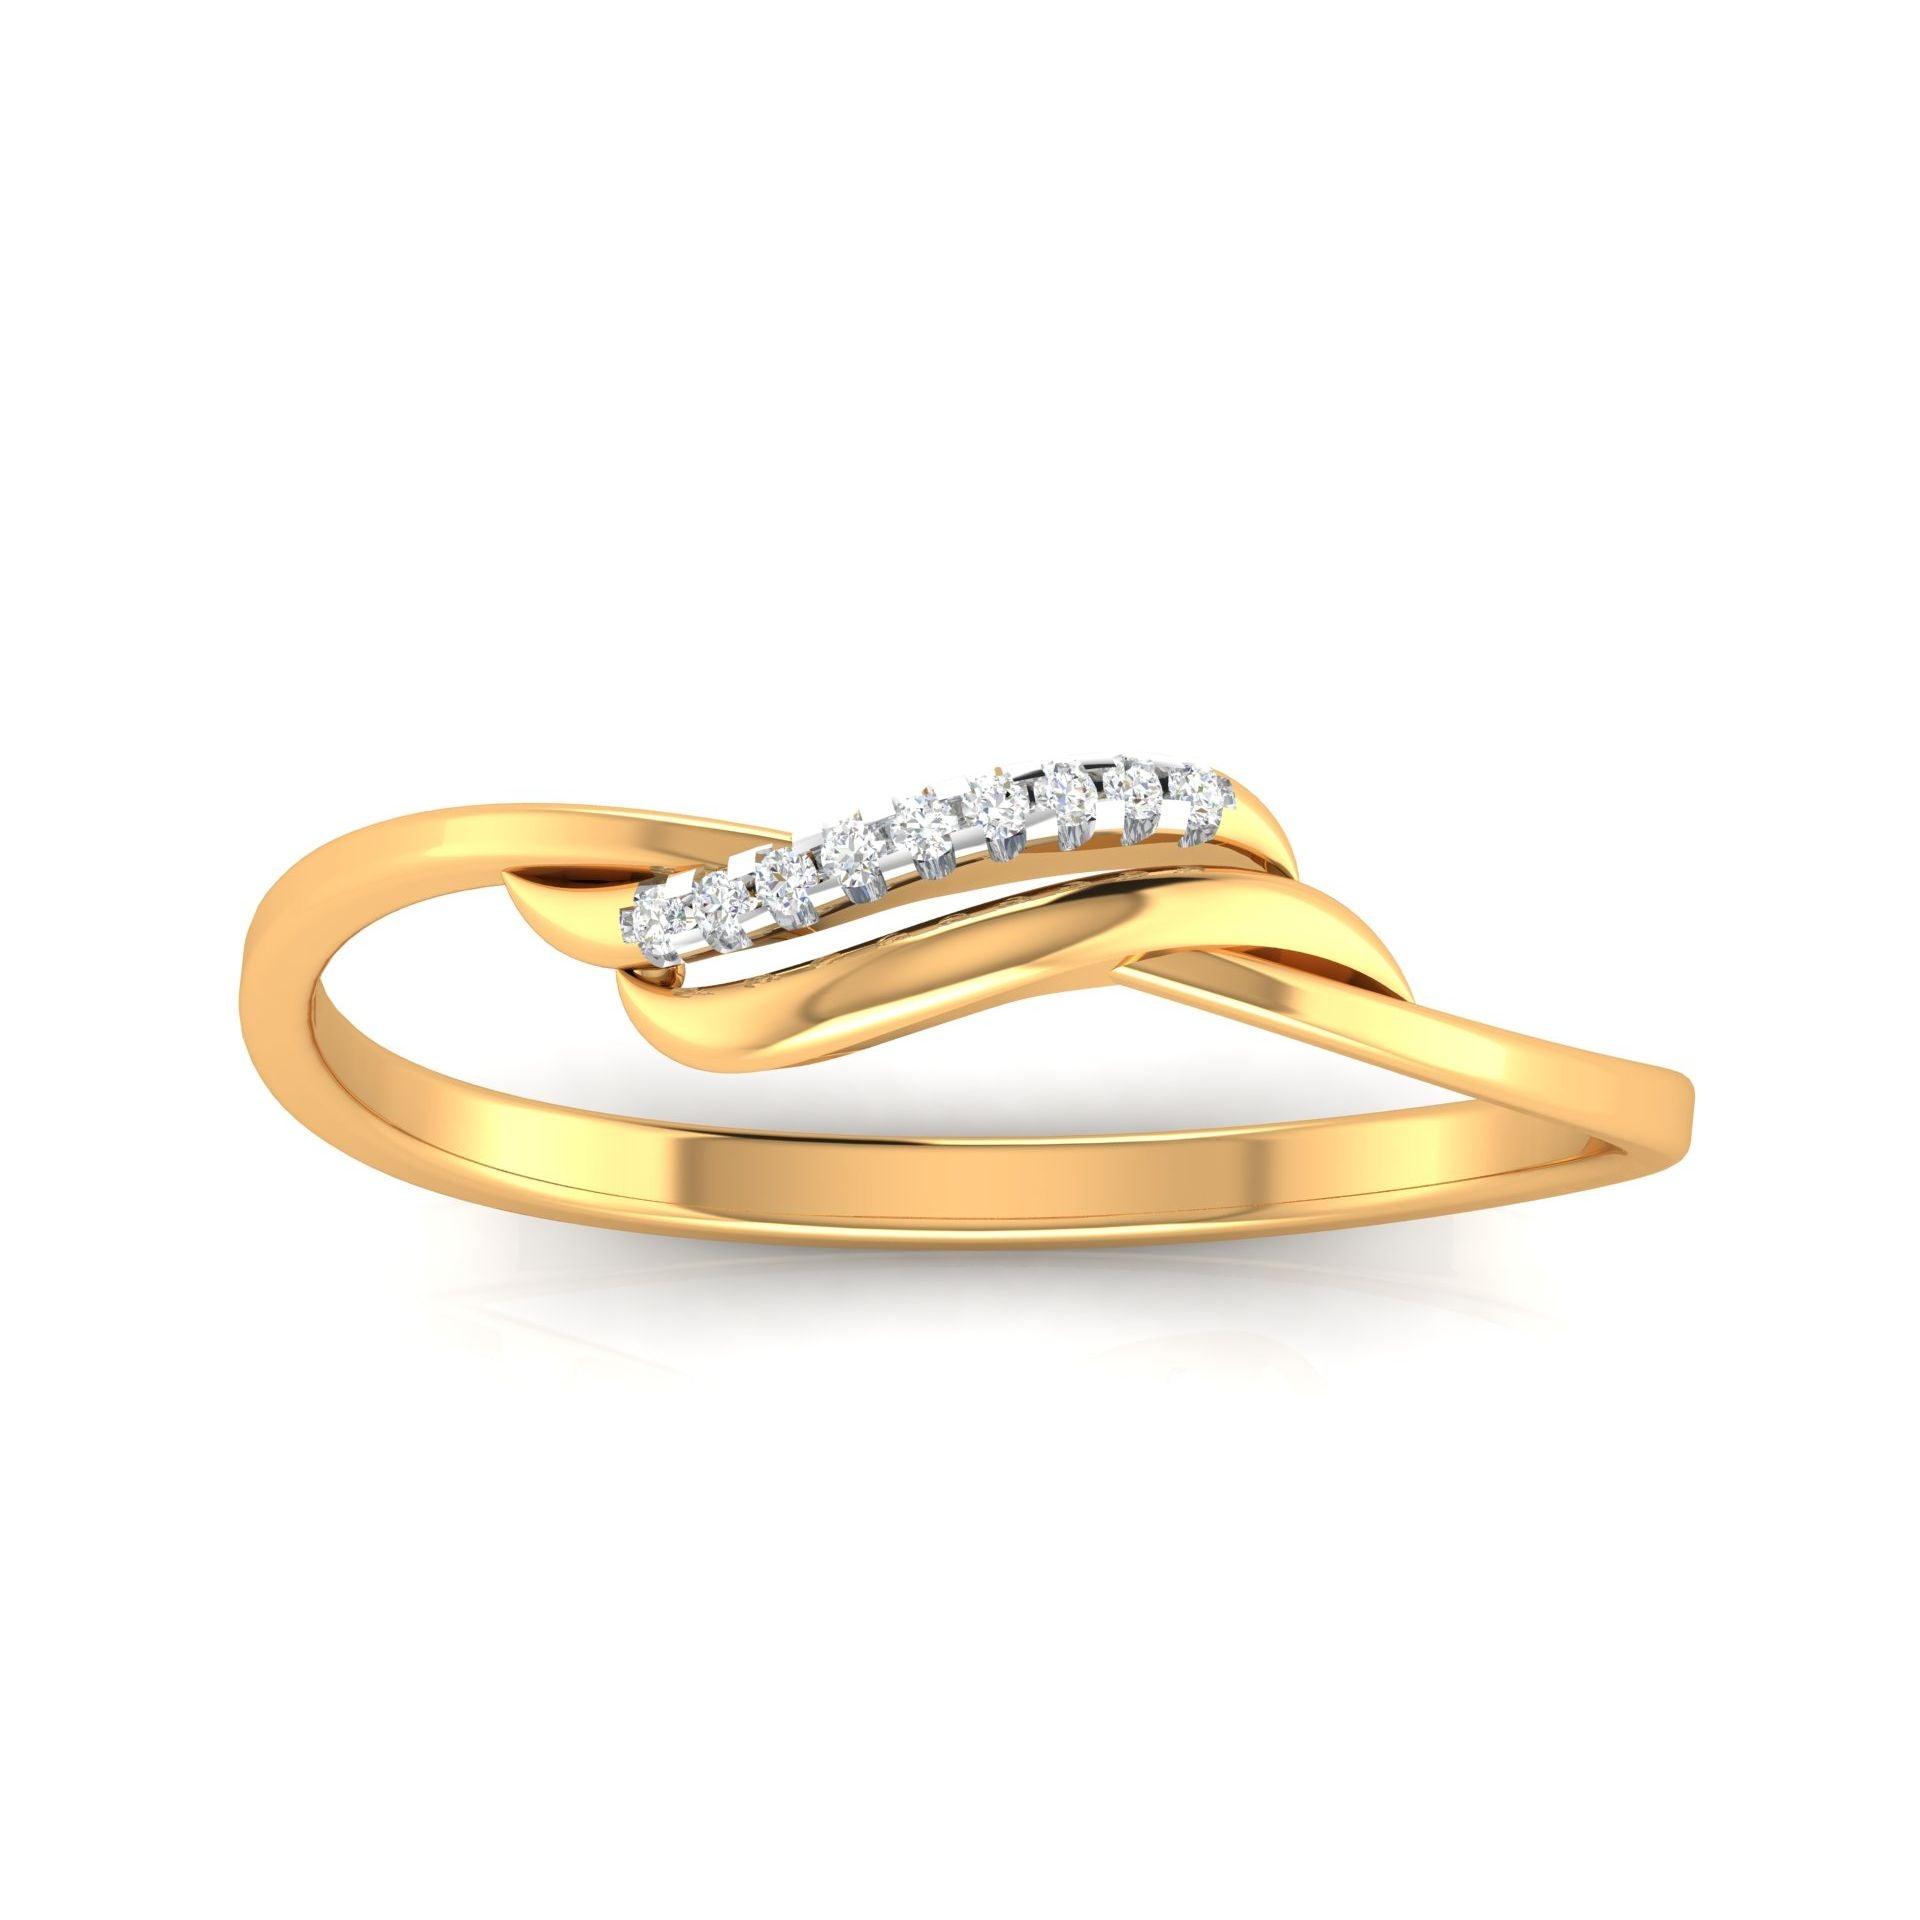 925 Sterling Silver Timeless Charm Elegant Antique Style Lightweight Gold-Plated Ring AUS-360 - Auory